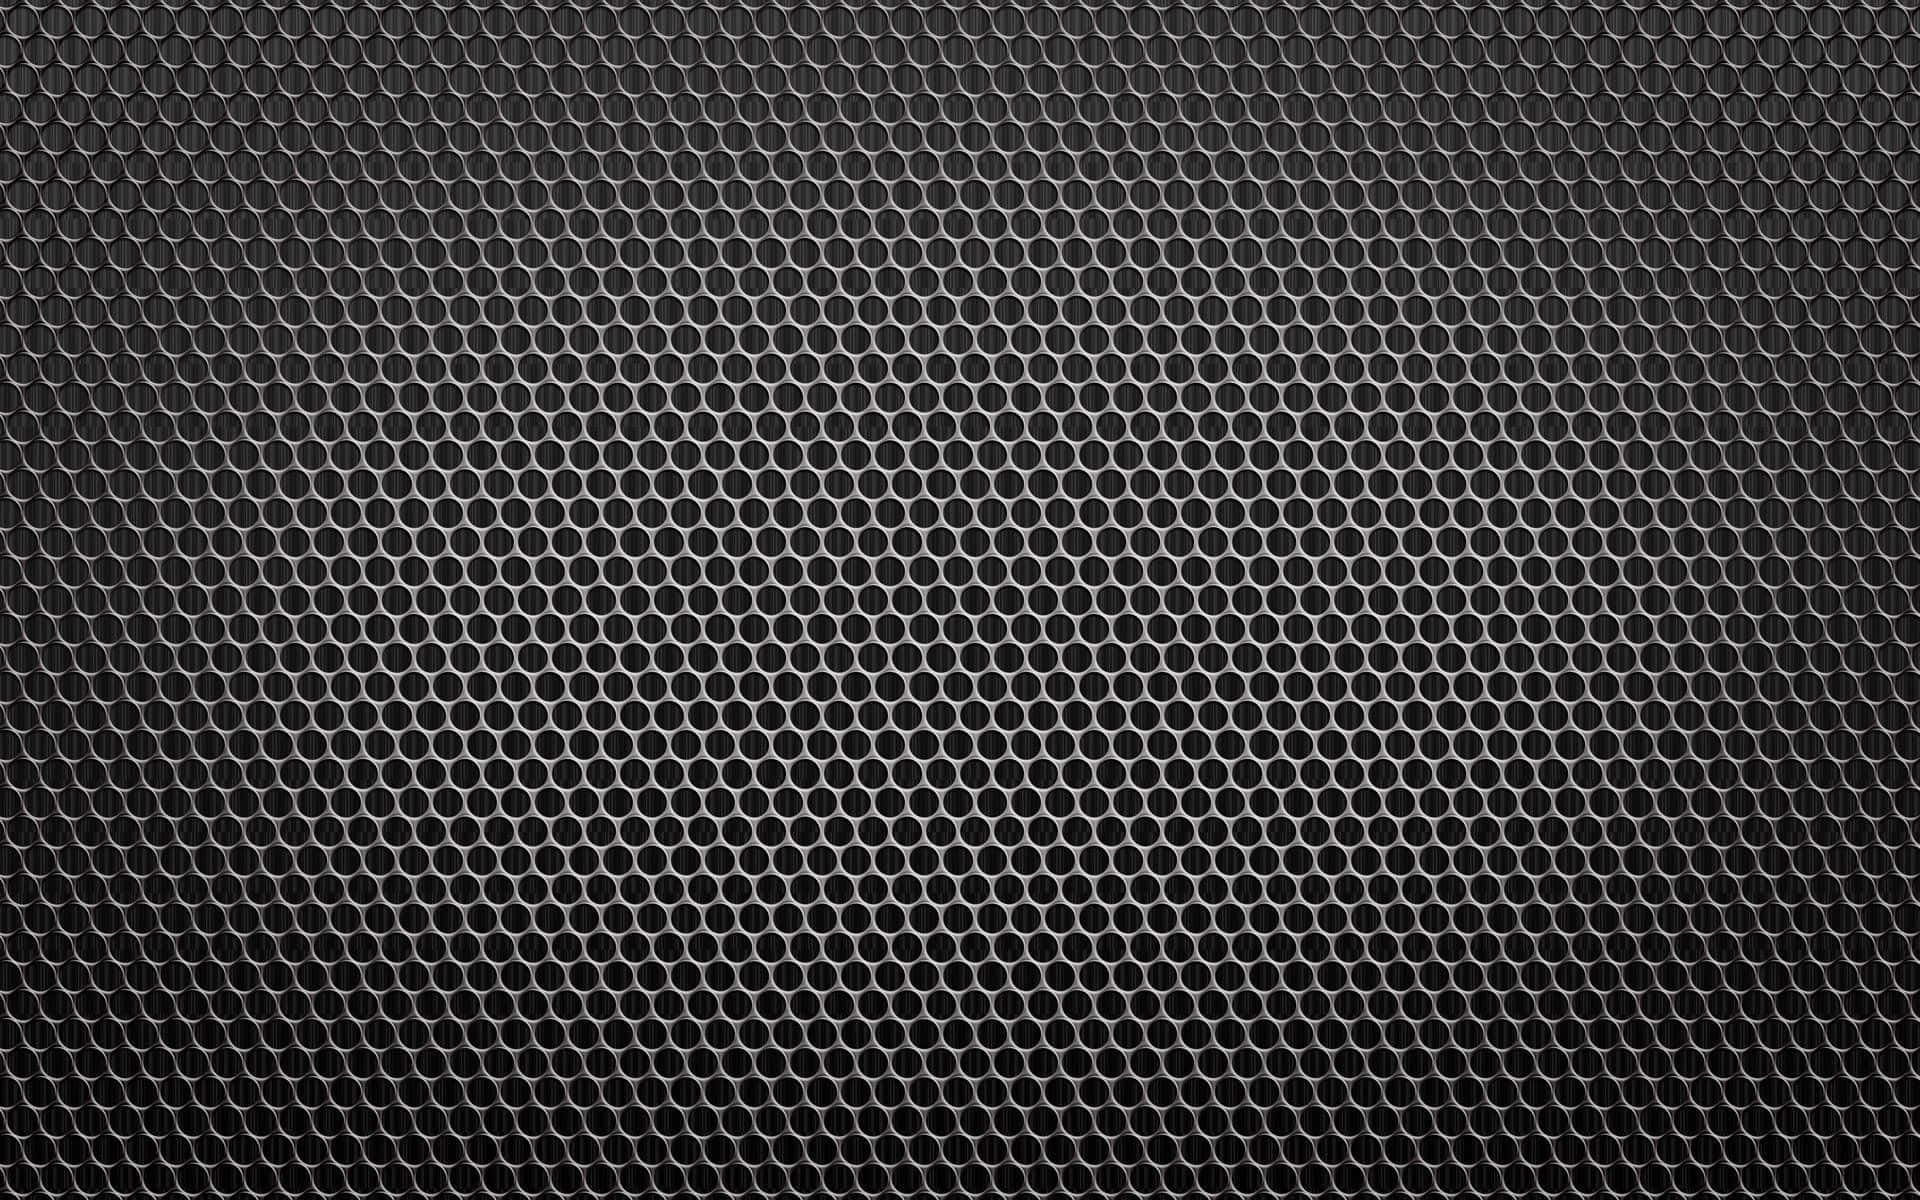 Metal Texture Speaker Grill Pattern Pictures